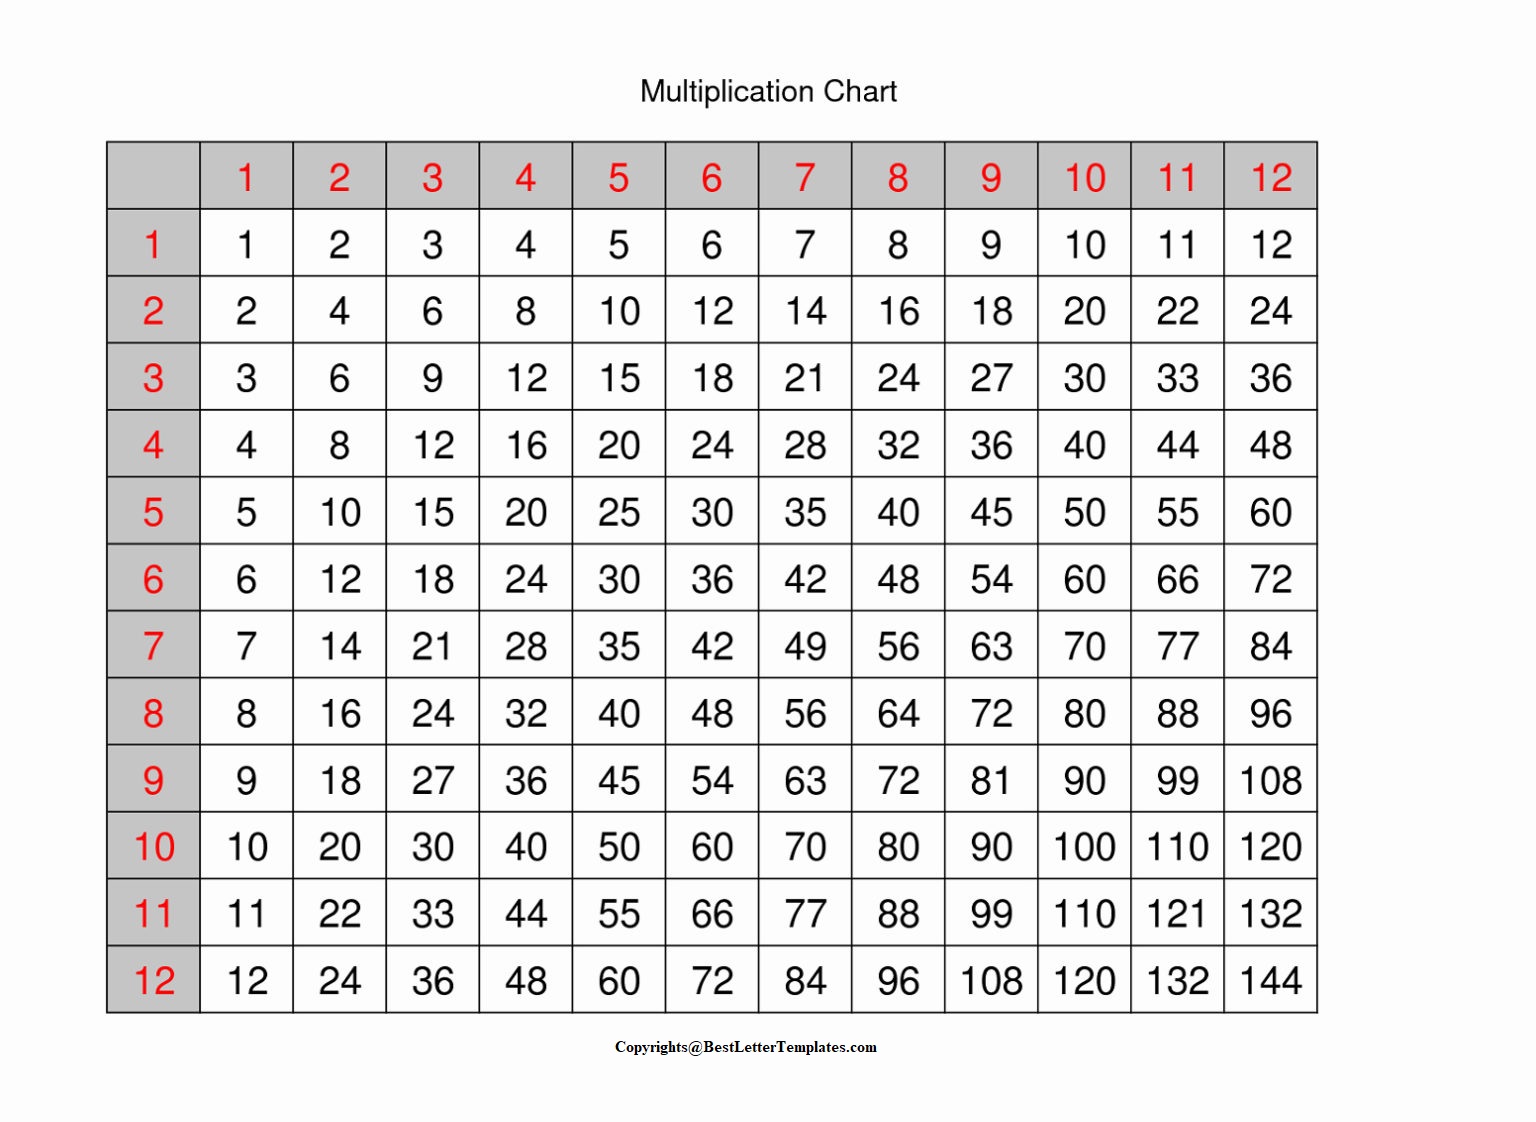 Multiplication Table Chart 1-12